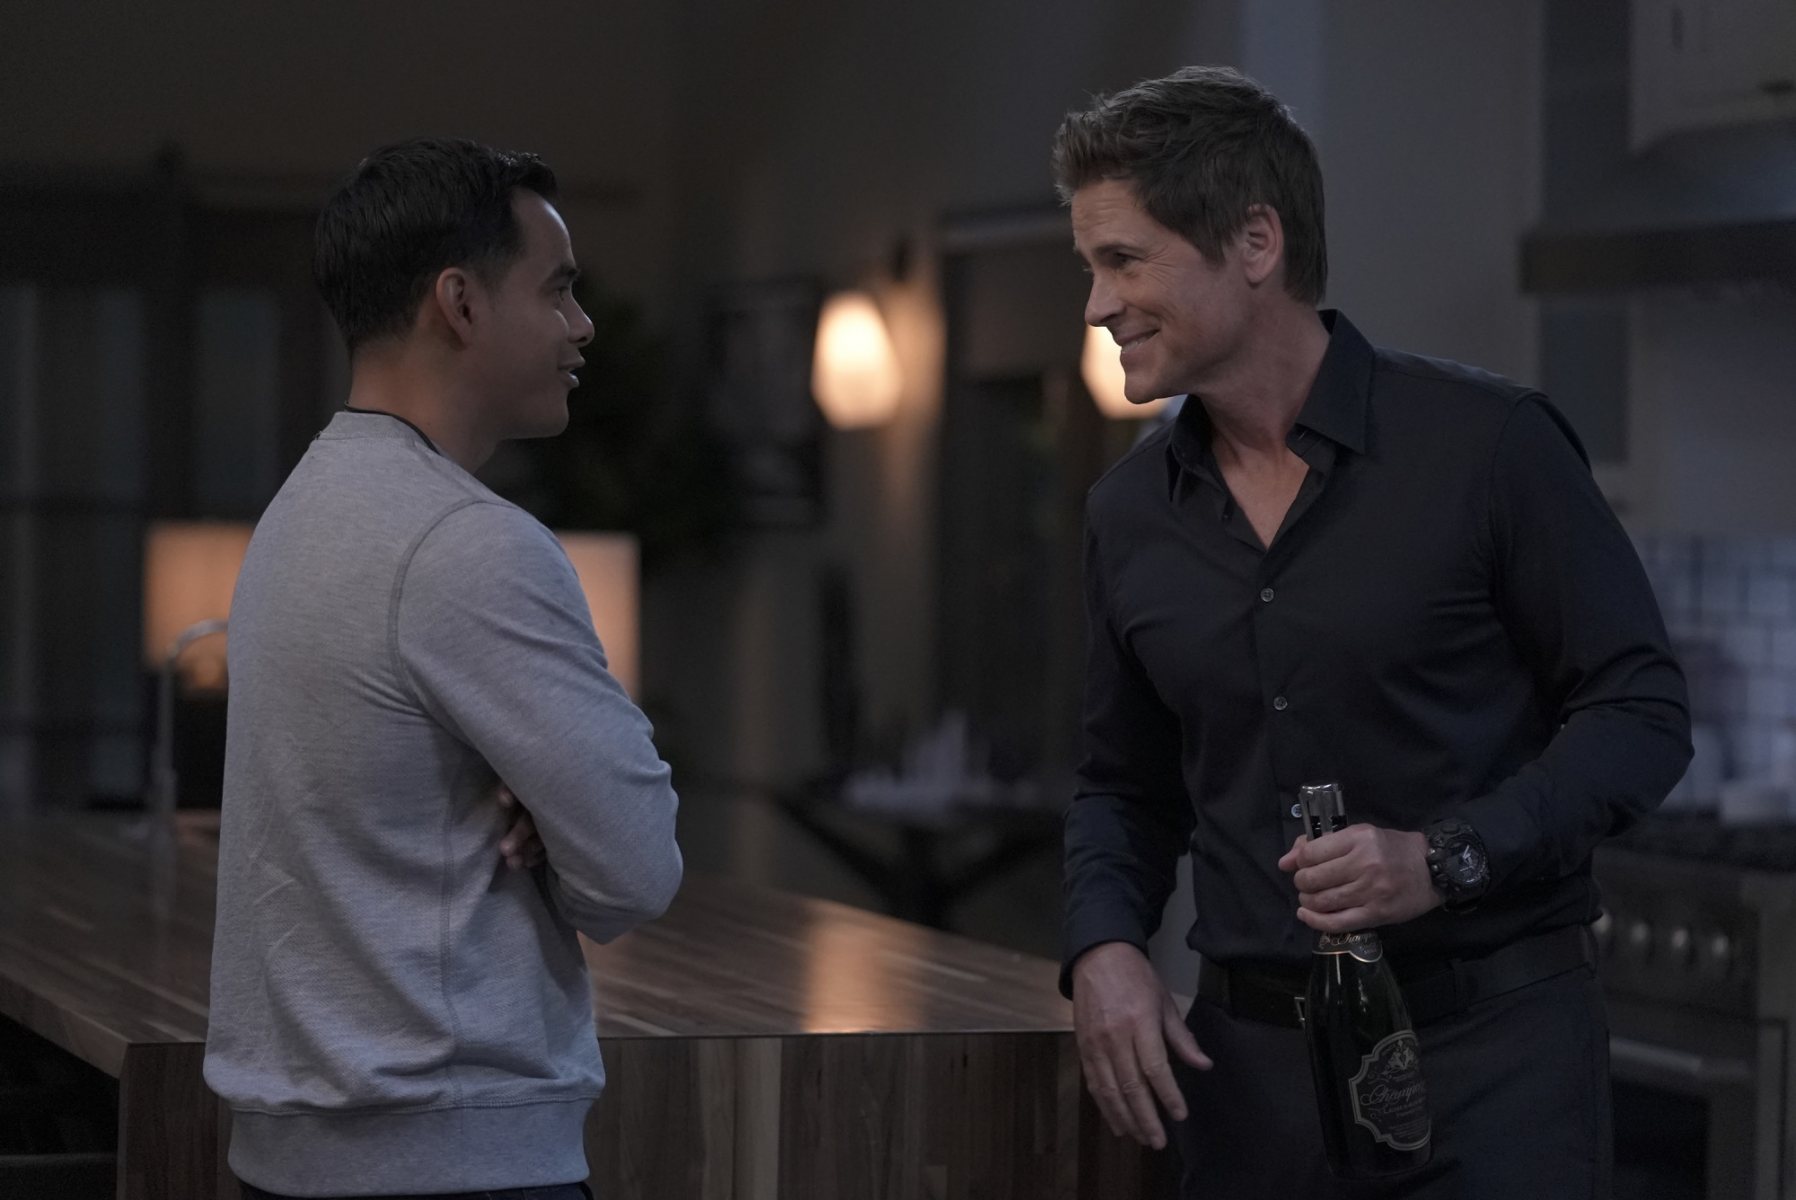 9-1-1 LONE STAR: L-R: Julian Works and Rob Lowe in the "Sellouts" episode of 9-1-1 LONE STAR airing Tuesday, Mar 28 (8:00-9:01 PM ET/PT) on FOX. © 2023 Fox Media LLC. CR: Kevin Estrada/FOX.